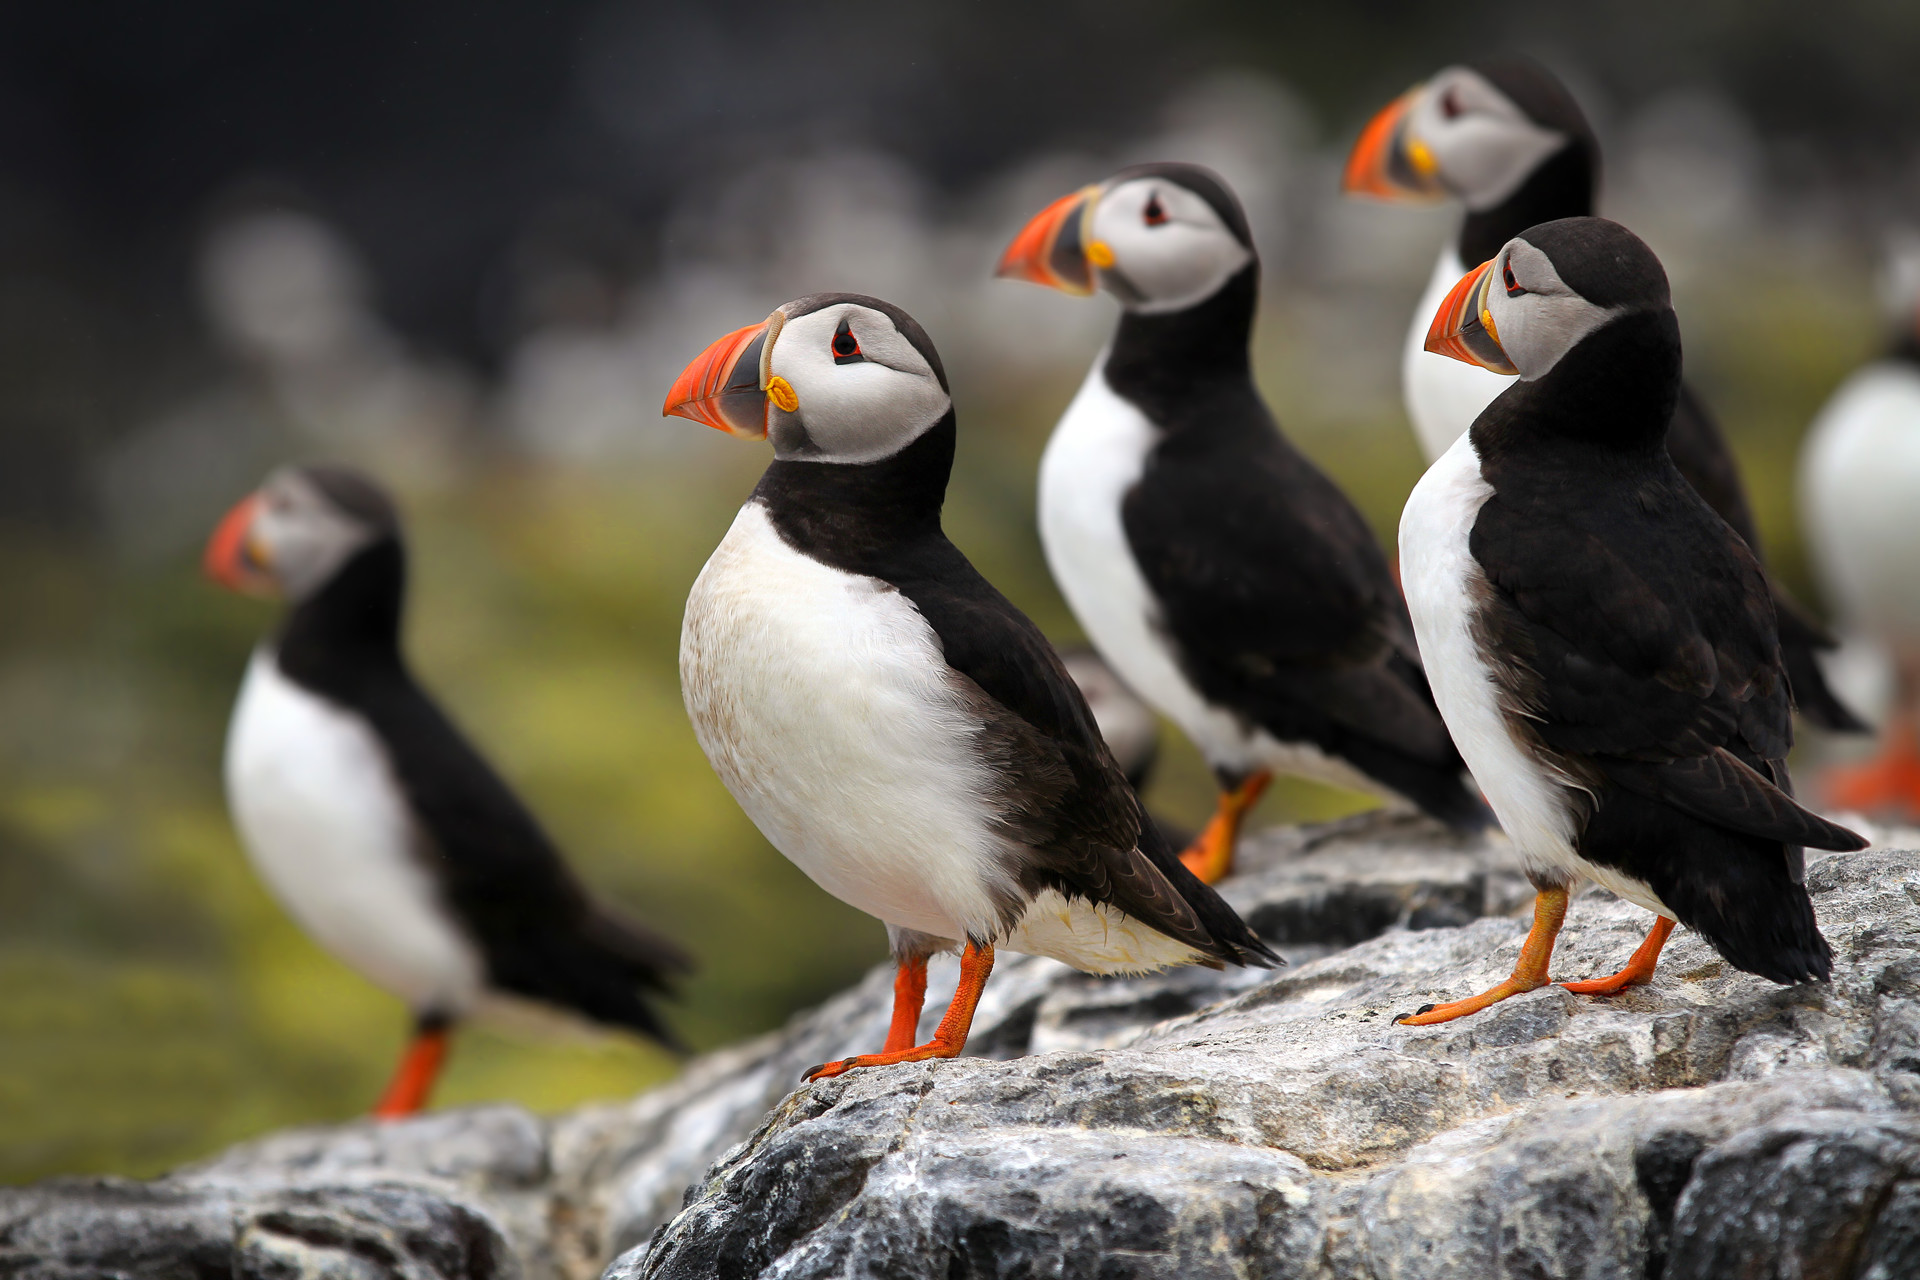 Background image - Puffins